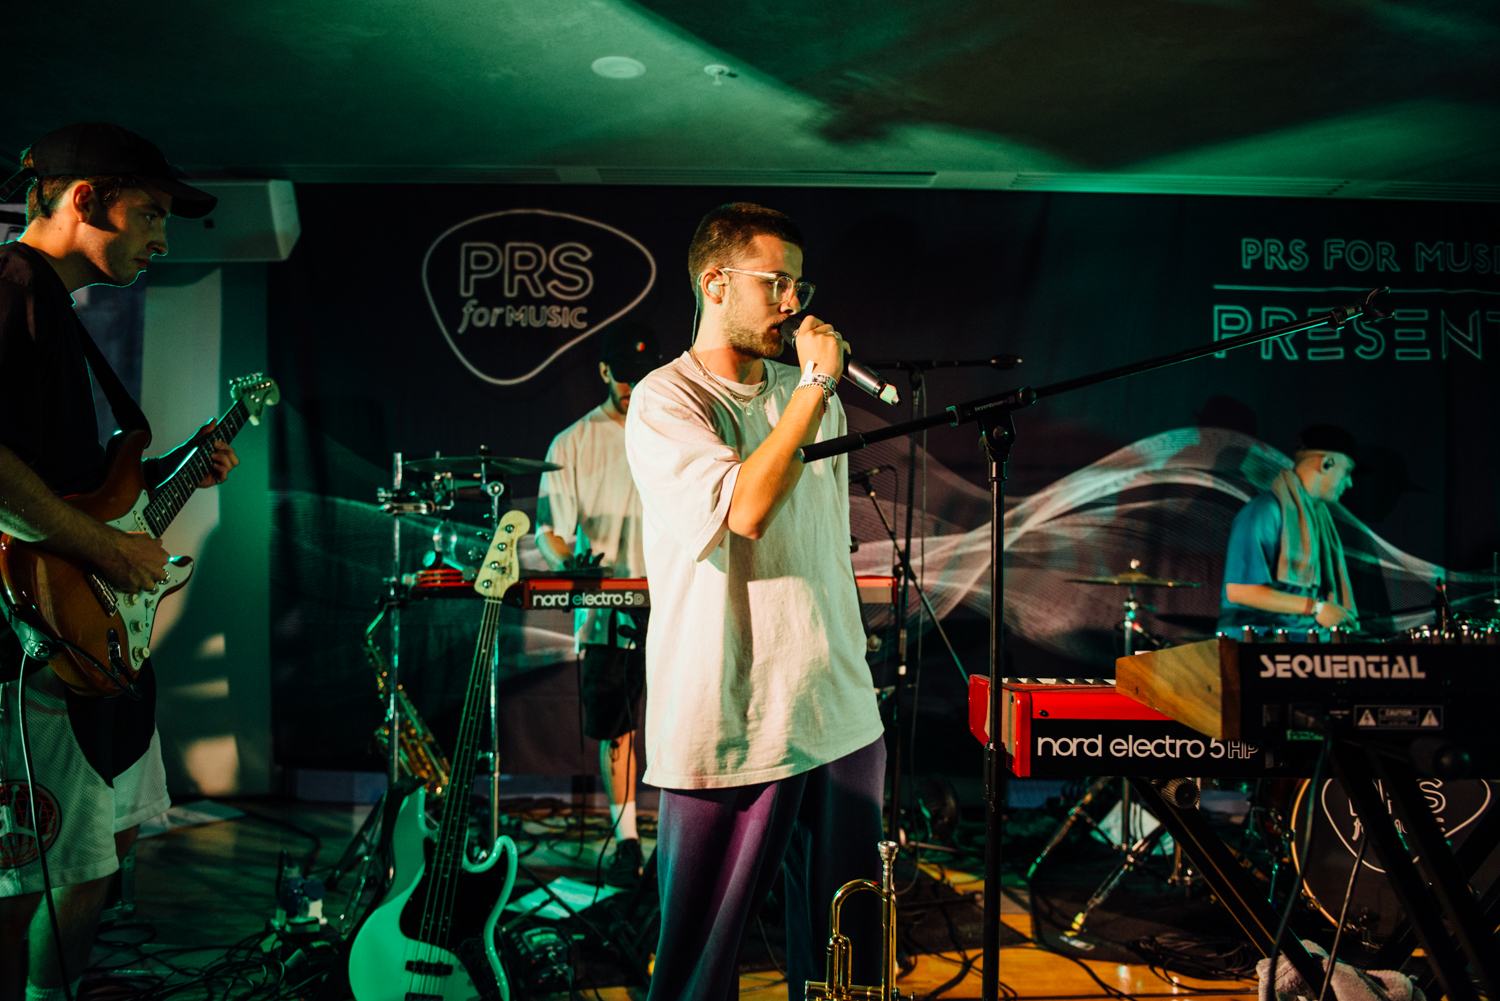 Easy Life perform at PRS presents July 2019